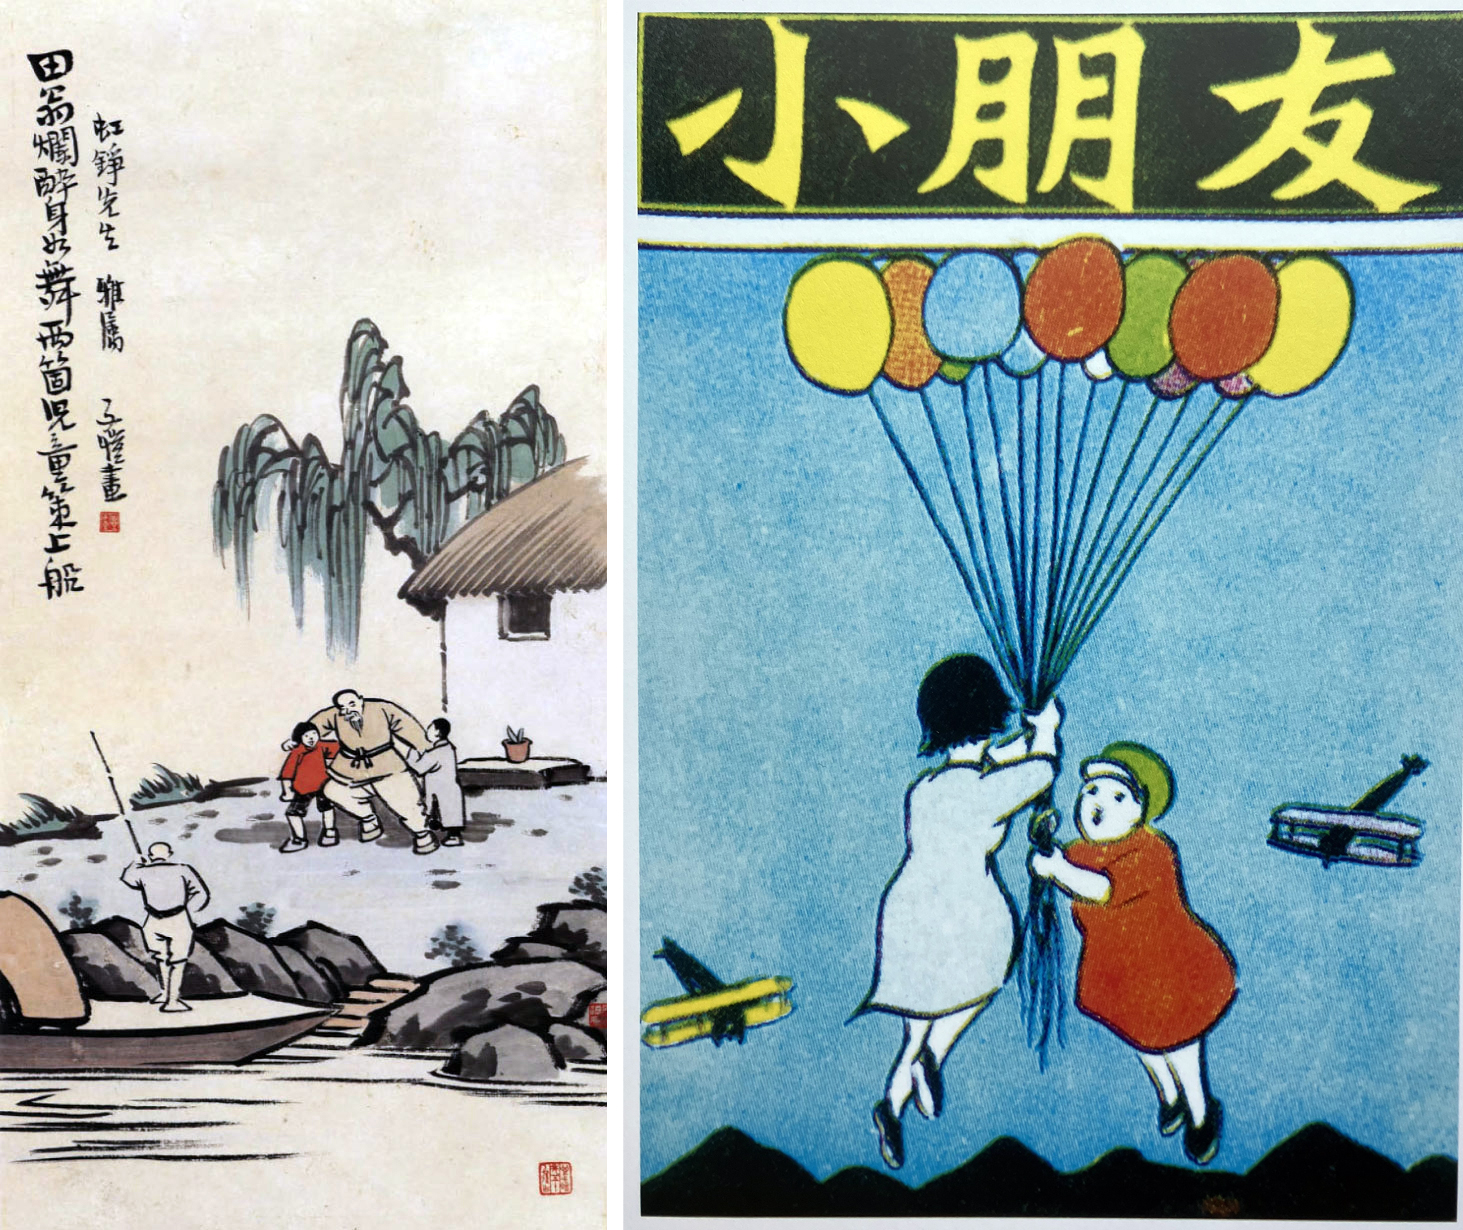 Left: Feng Zikai, Drunken Old Farmer, ca. 1947, hanging scroll, ink on paper, China, 65.7 x 32.7 cm (The Metropolitan Museum of Art); right: Feng Zikai, Young Friends, September 1931, magazine cover, dimensions unknown, various locations